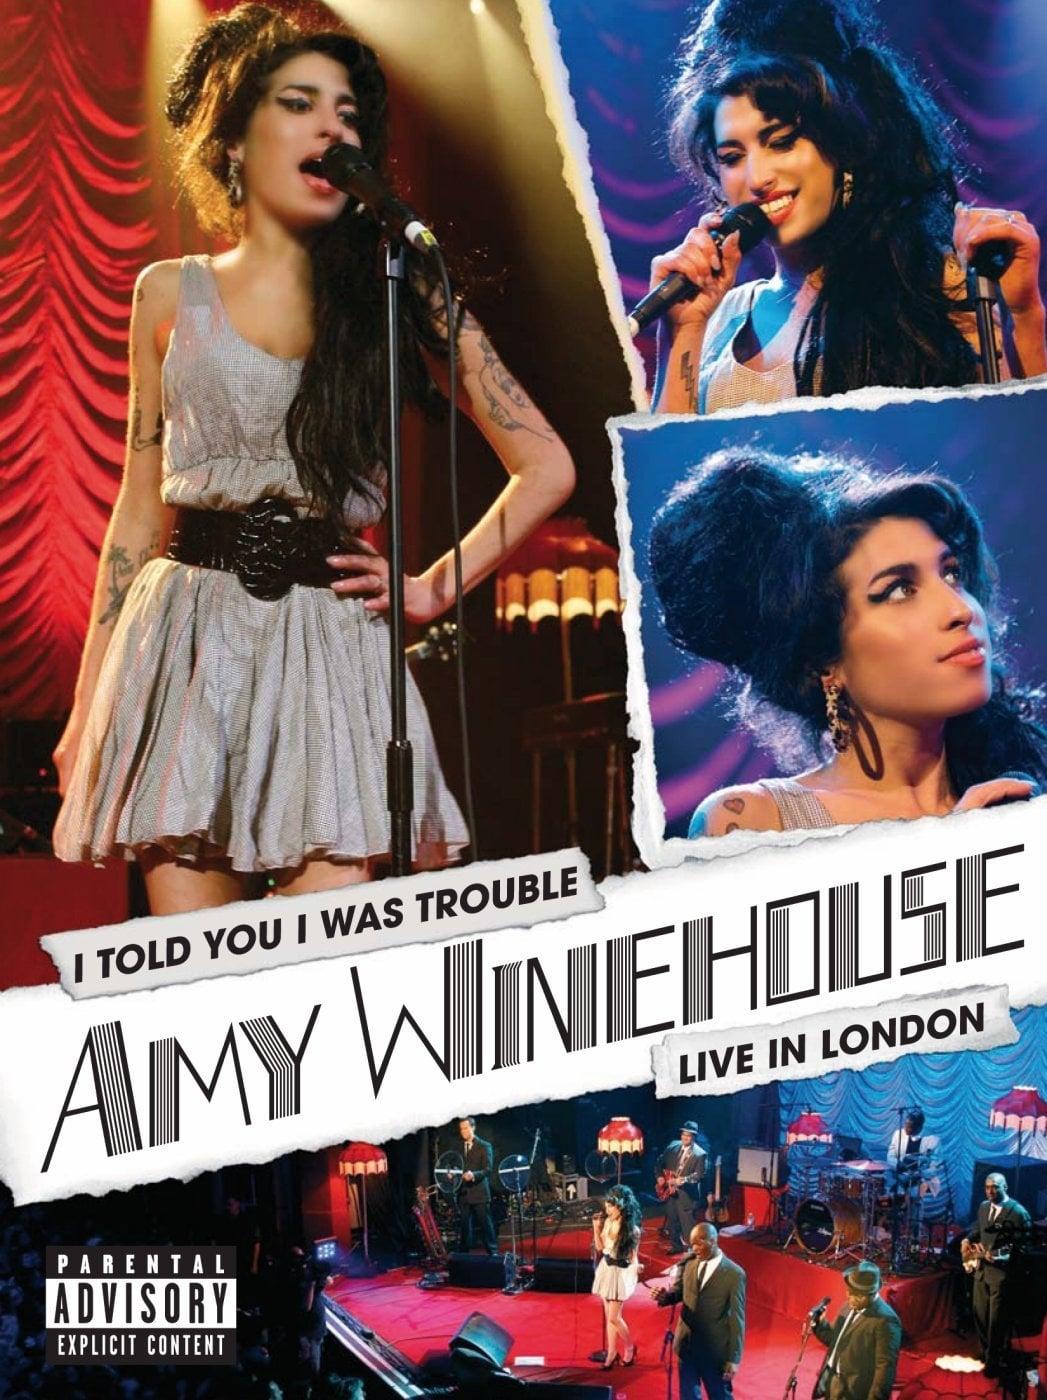 Amy Winehouse: I Told You I Was Trouble (Live in London) poster